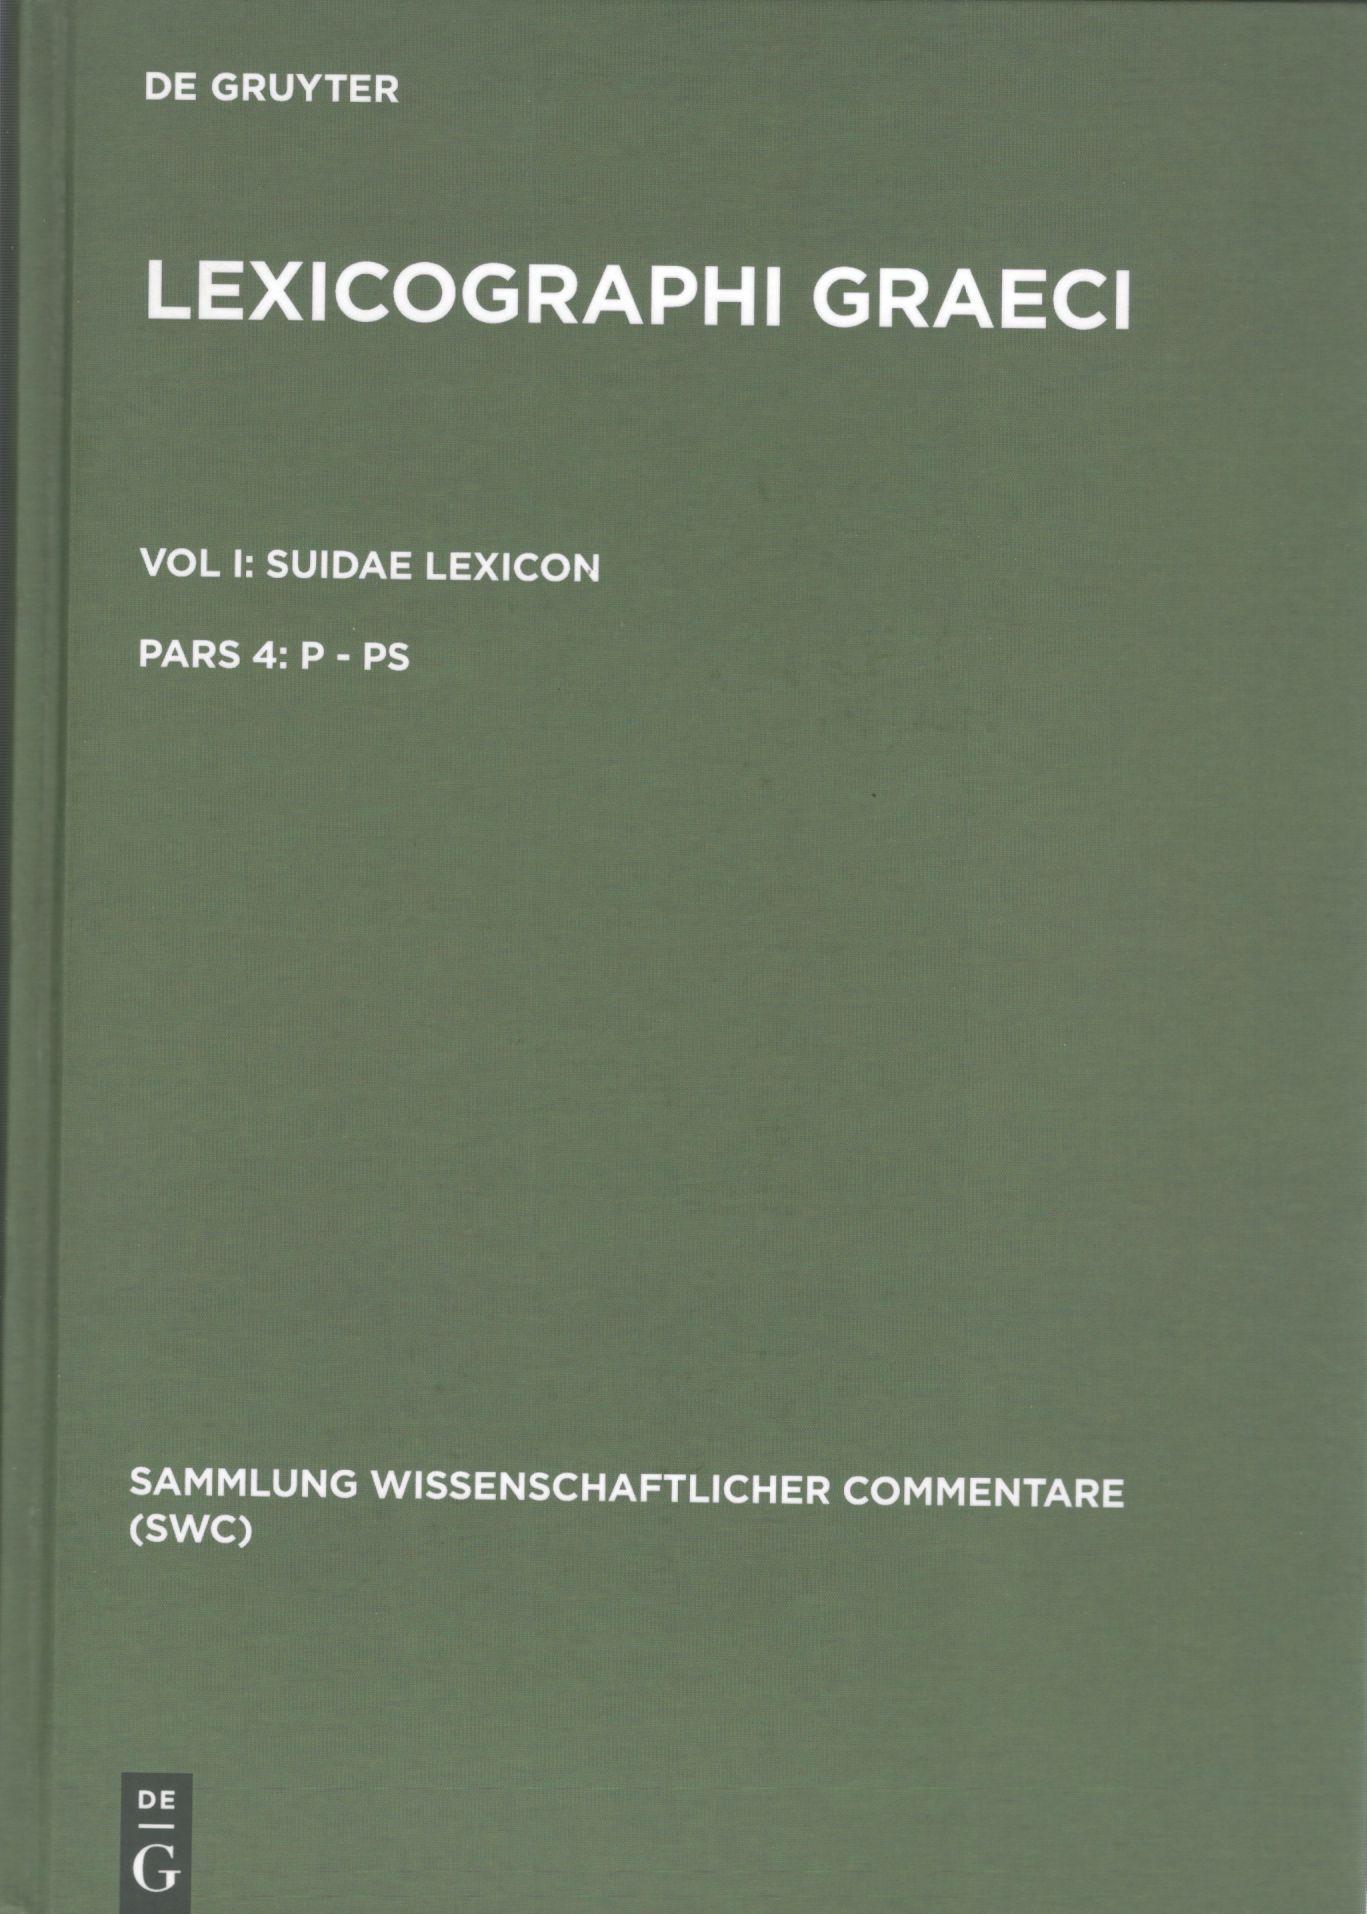 VOL. I: SUIDAE LEXICON PARS 4: P - PS